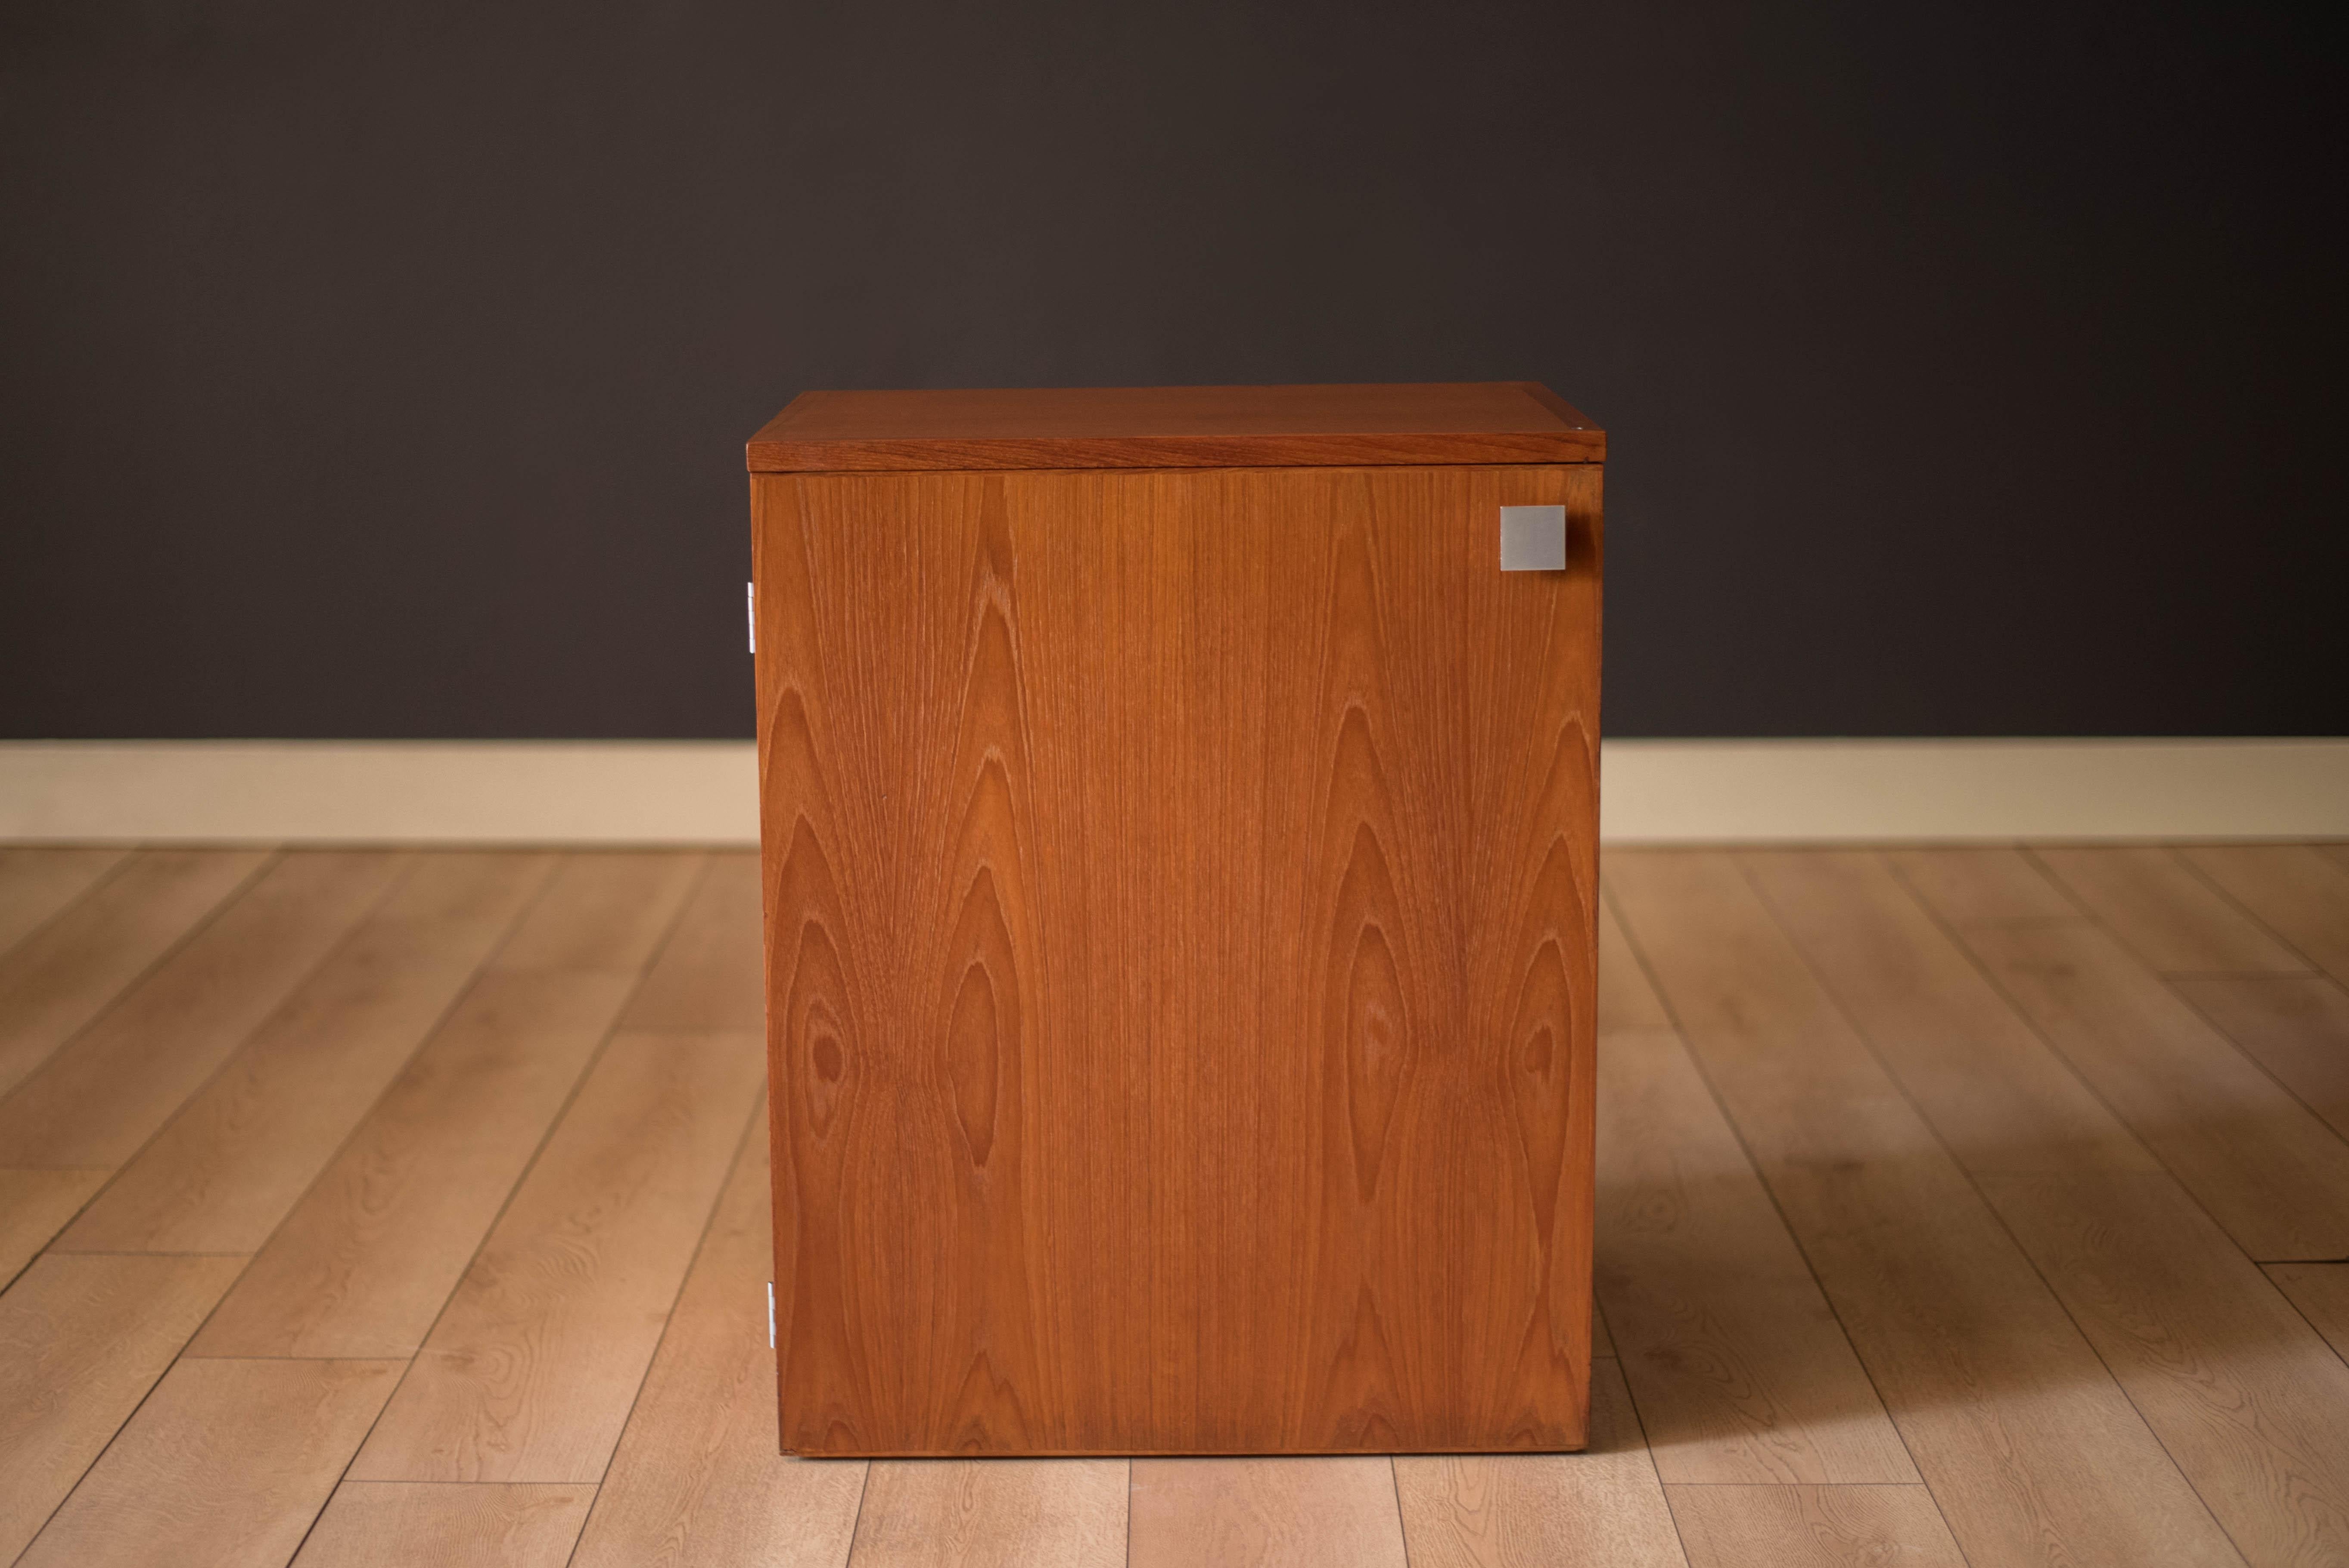 Mid-Century Modern compact dry bar cabinet in teak model no. 7739 manufactured by Dyrlund, Copenhagen. This clever piece features an extendable serving top with an easy to maintain black laminate surface. Equipped with two dovetail drawers, a